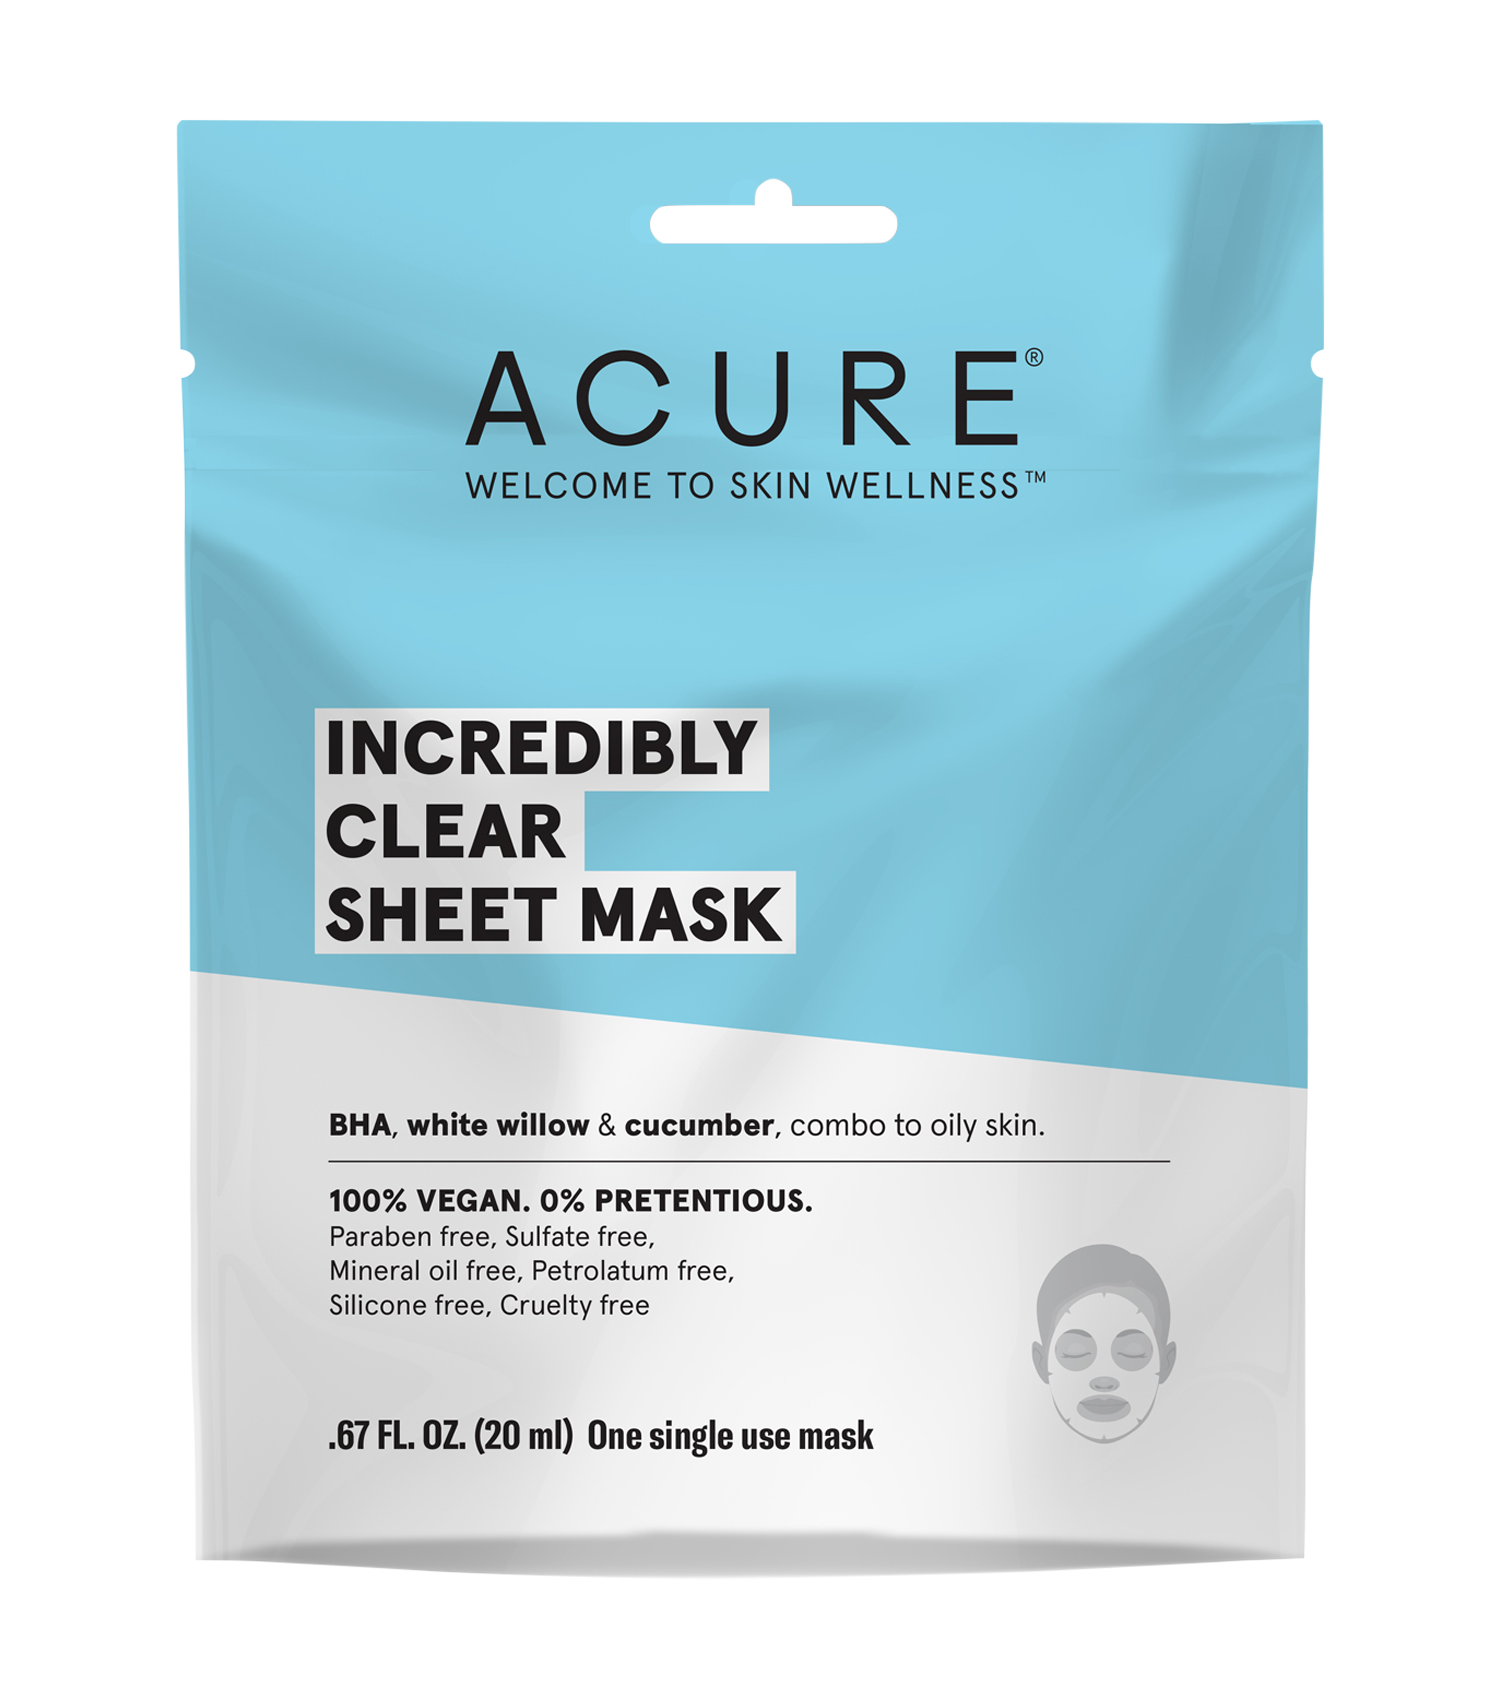 Acure Organics INCREDIBLY CLEAR SHEET MASK